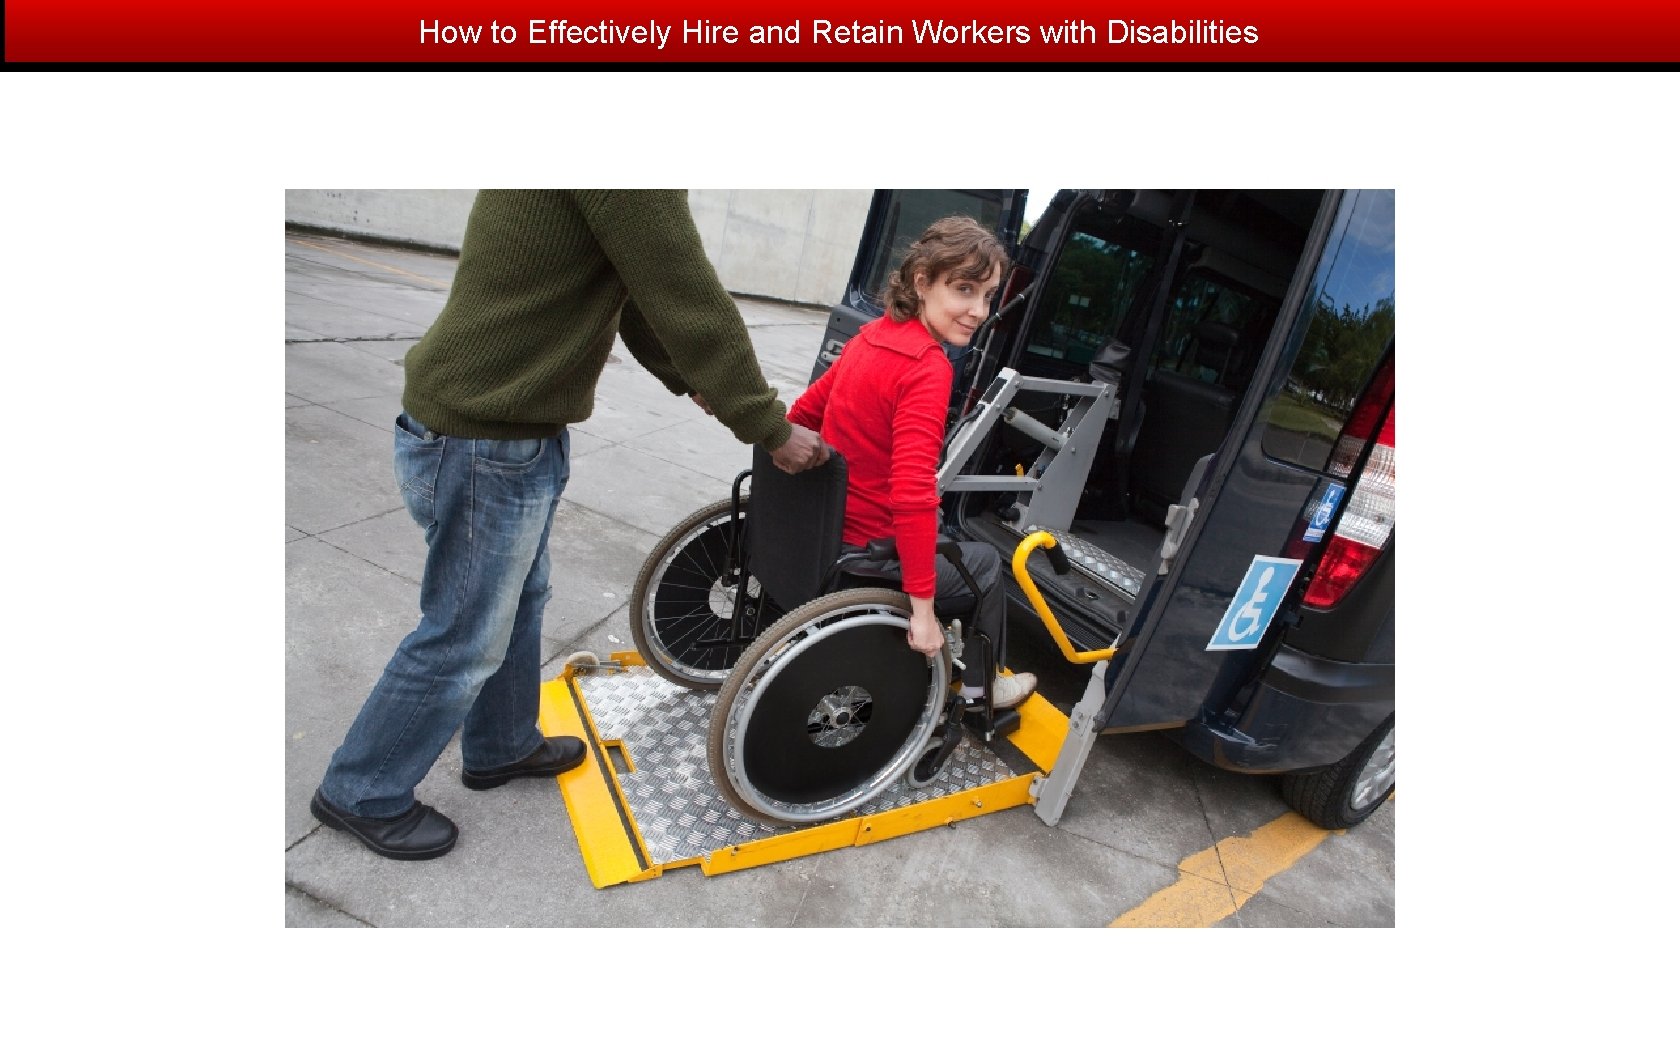 How to Effectively Hire and Retain Workers with Disabilities 